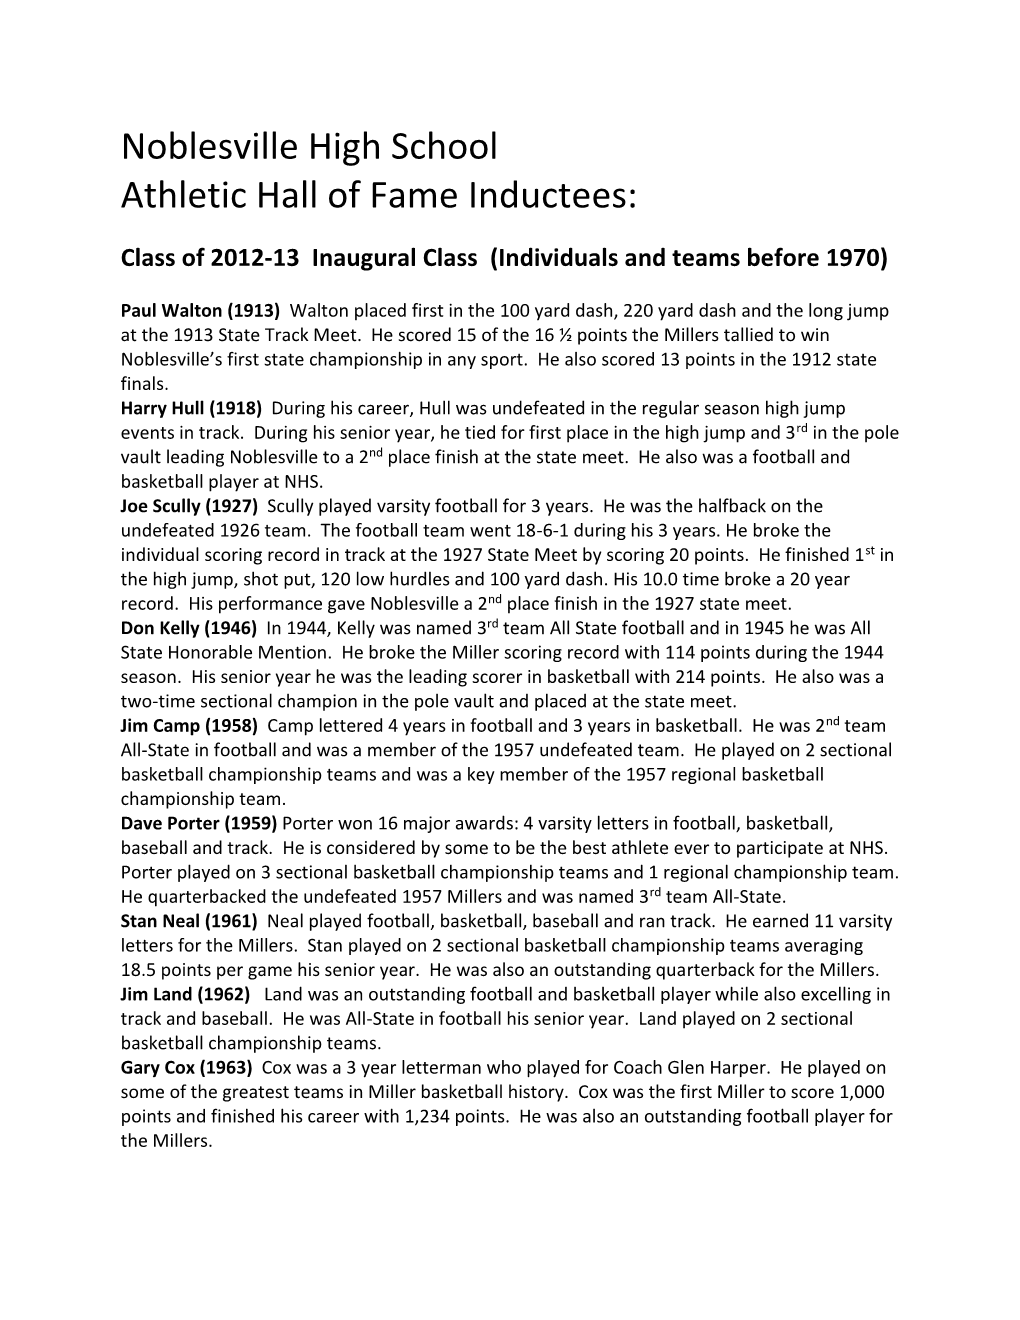 Noblesville High School Athletic Hall of Fame Inductees